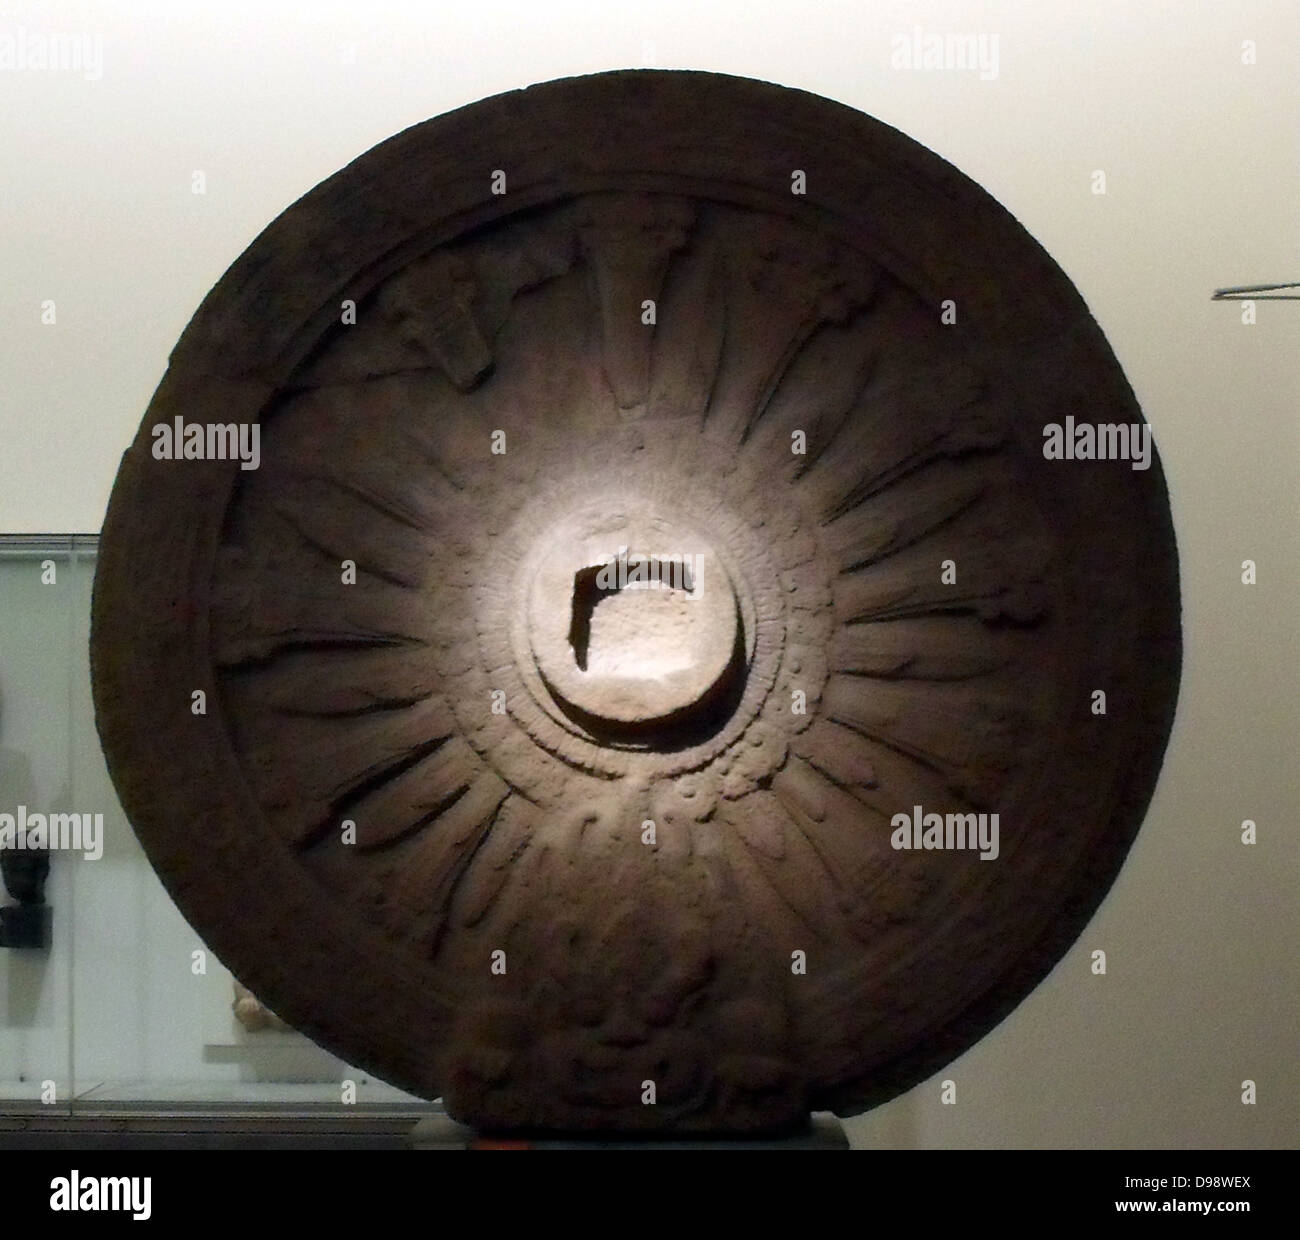 Wheel of Law 'dharmacakra. Wheel symbolizing the doctrine in Buddhism. it refers to the first prediction of the Buddha in the Deer Park of Sarnath, near Varanasi. 8th century, 9th century stone sculpture from Phra Pathom Temple, Thailand Stock Photo